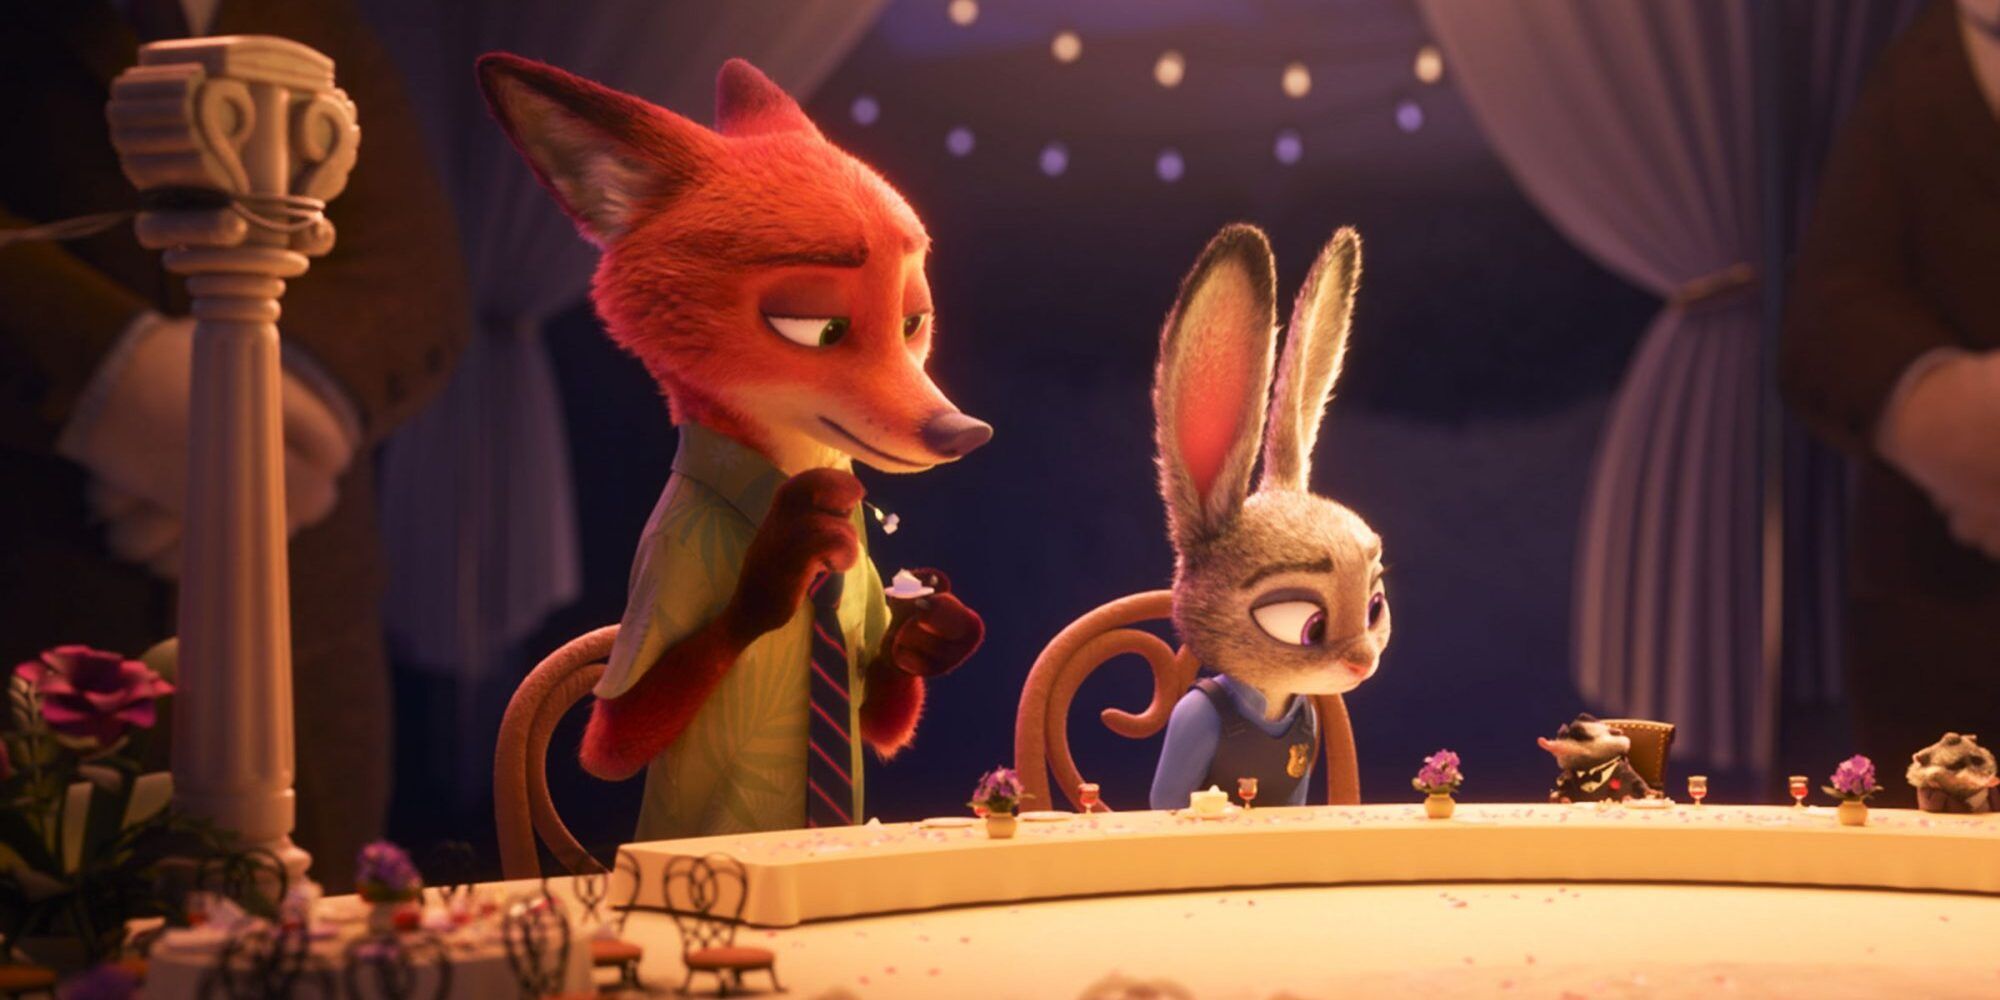 Judy Hopps and Nick Wilde dining in Zootopia